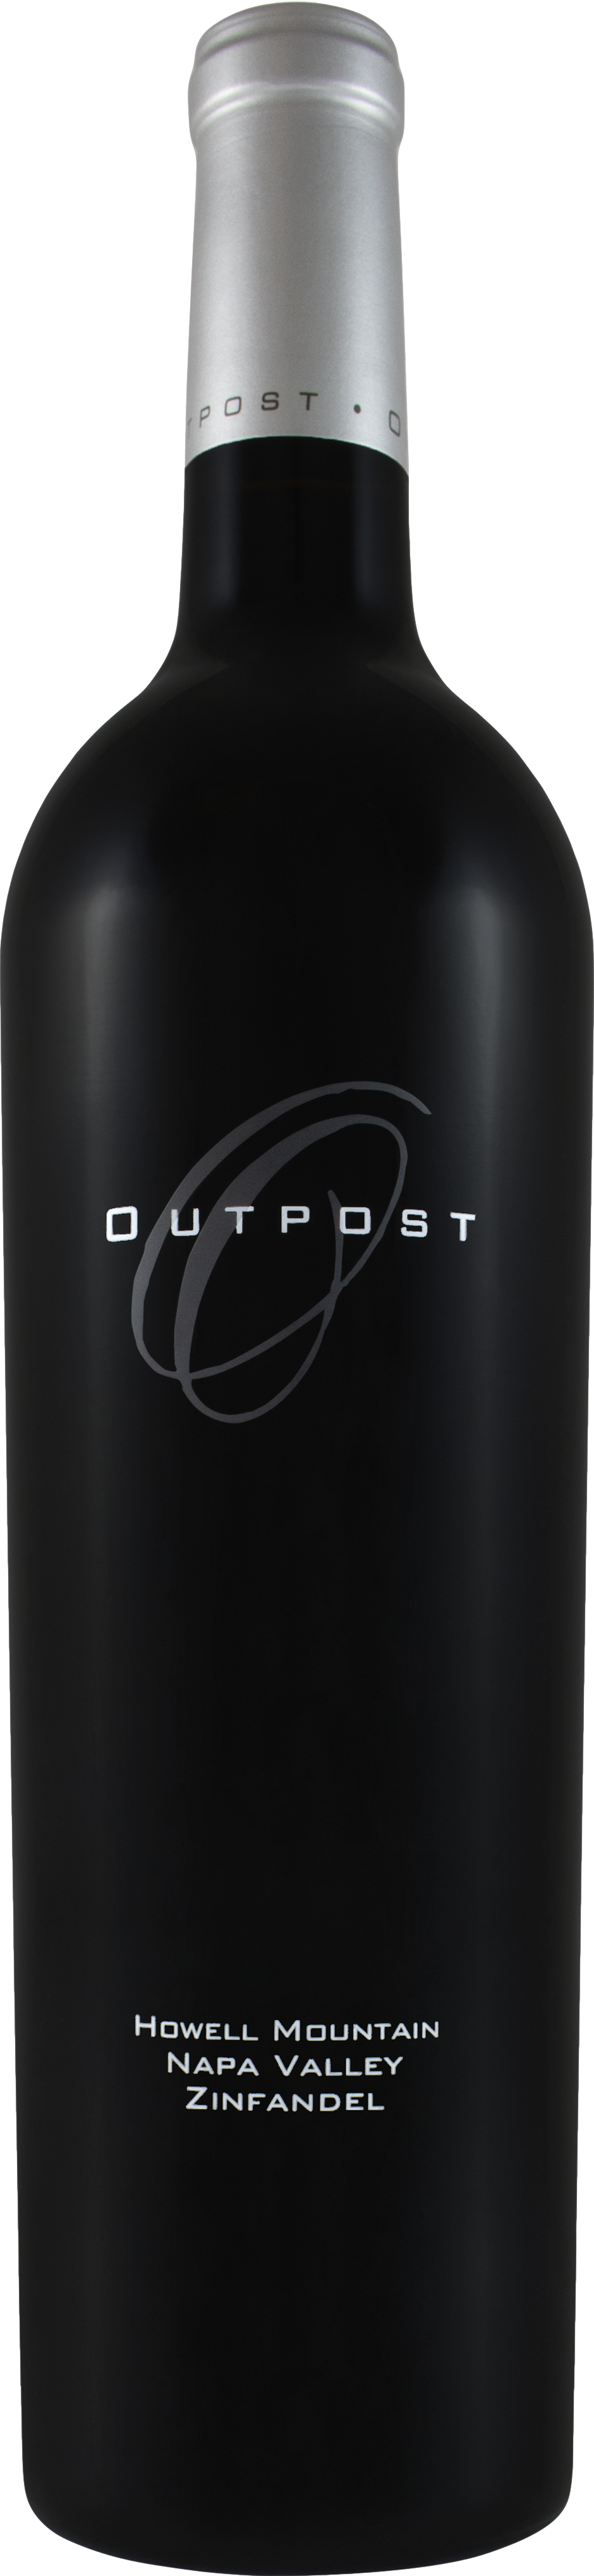 Outpost Howell Mountain Zinfandel 2017 Outpost 8wines DACH